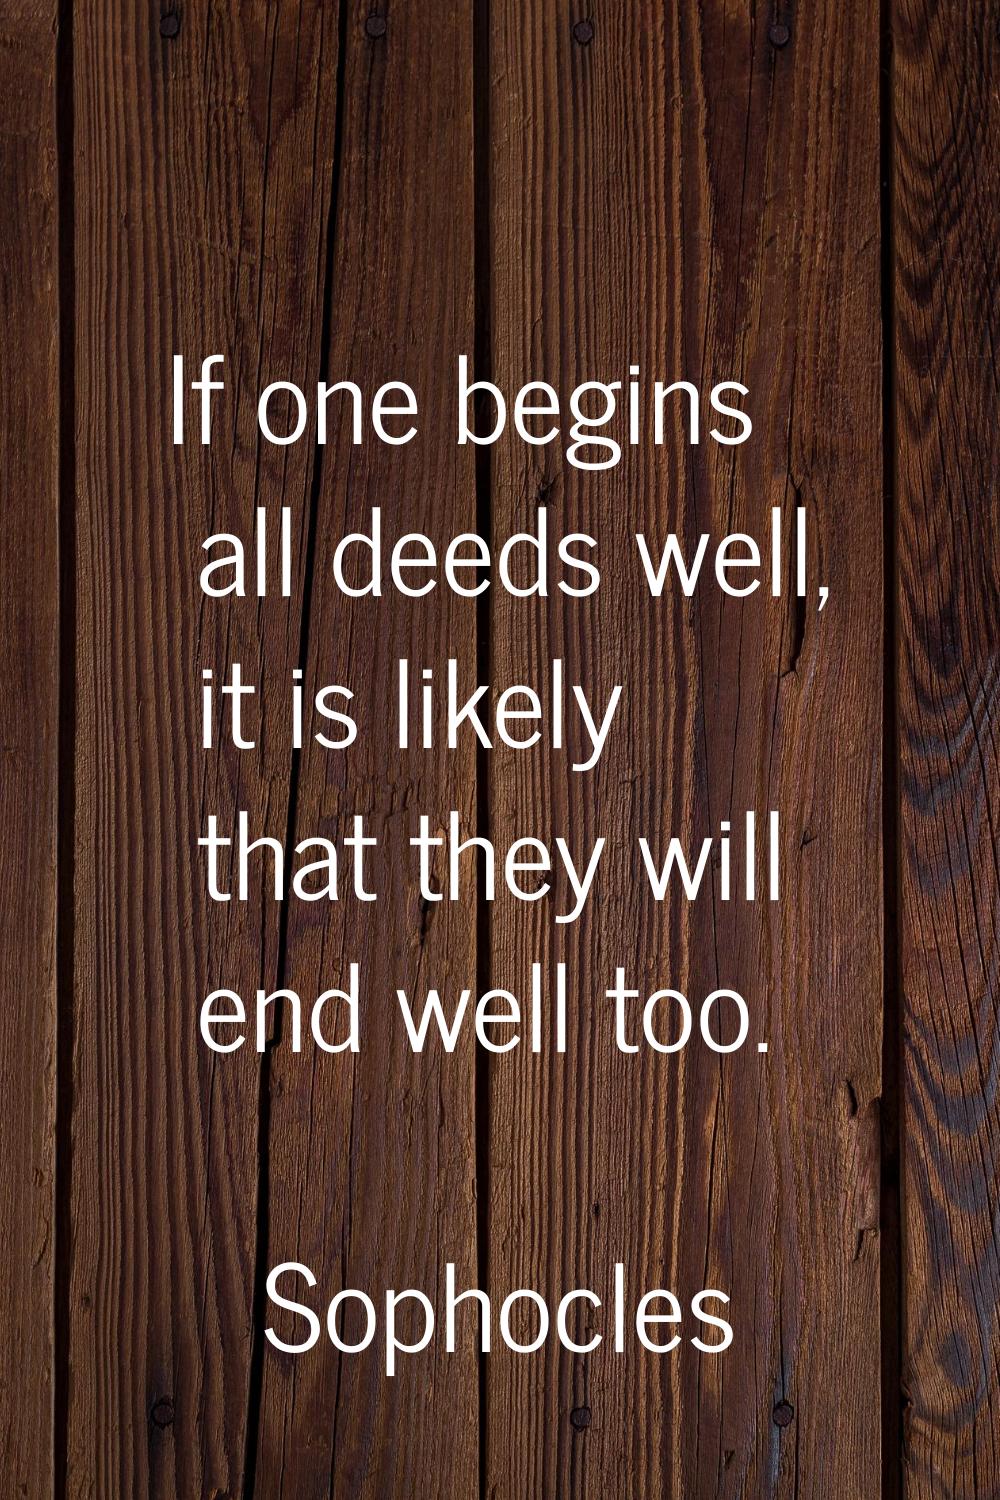 If one begins all deeds well, it is likely that they will end well too.